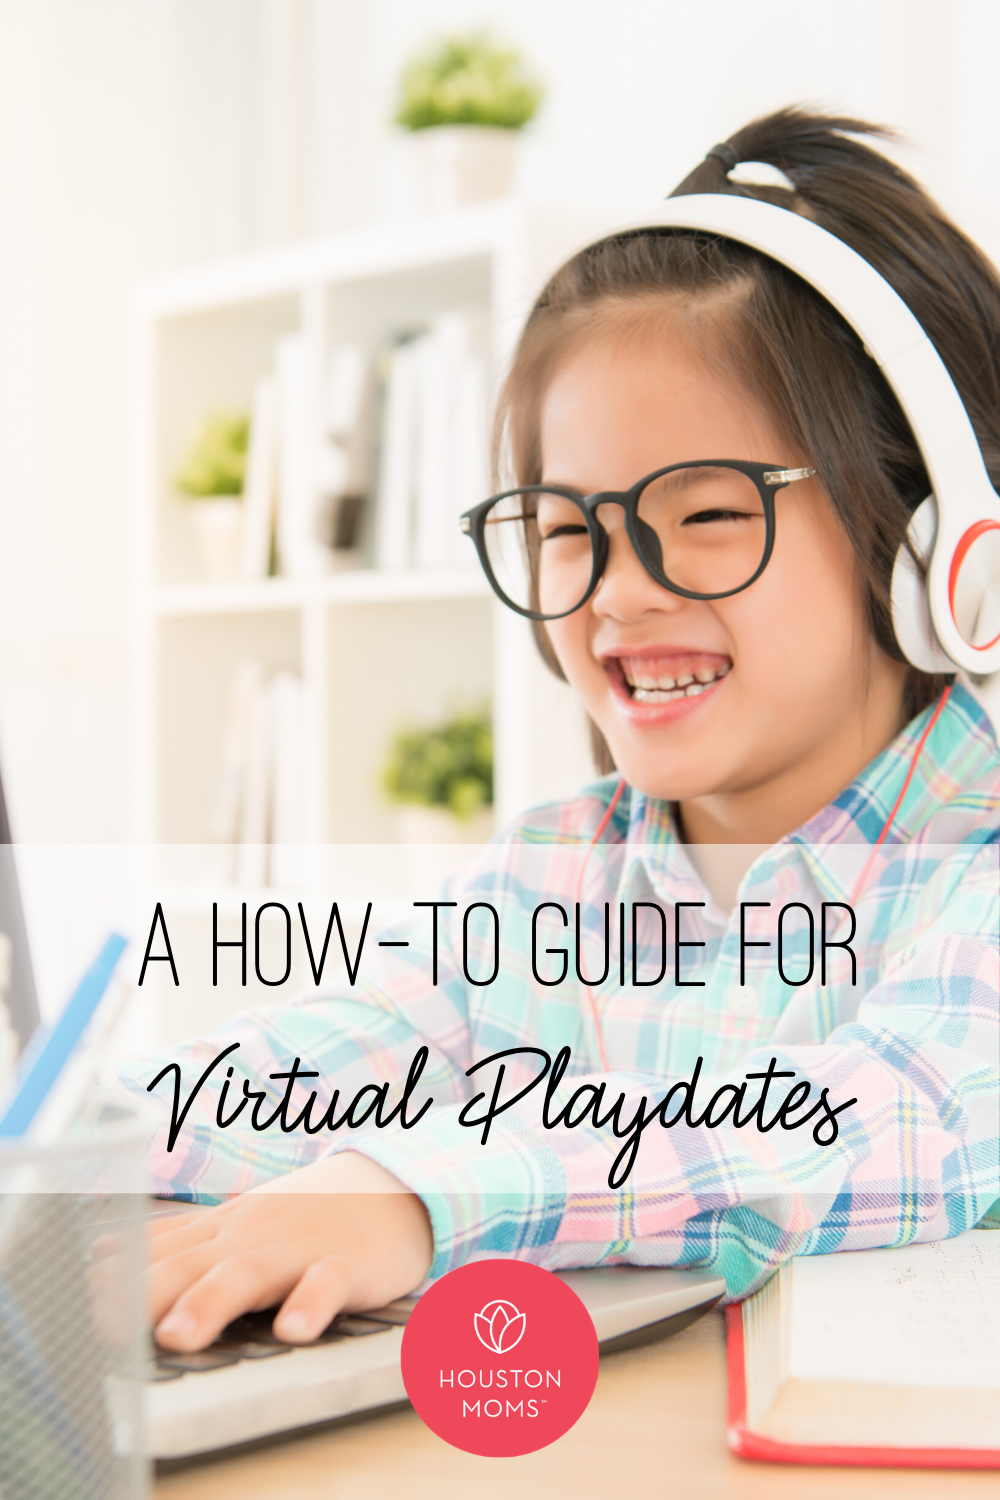 Houston Moms "A How-To Guide to Virtual Playdates" #houstonmomsblog #houstonmoms #momsaroundhouston